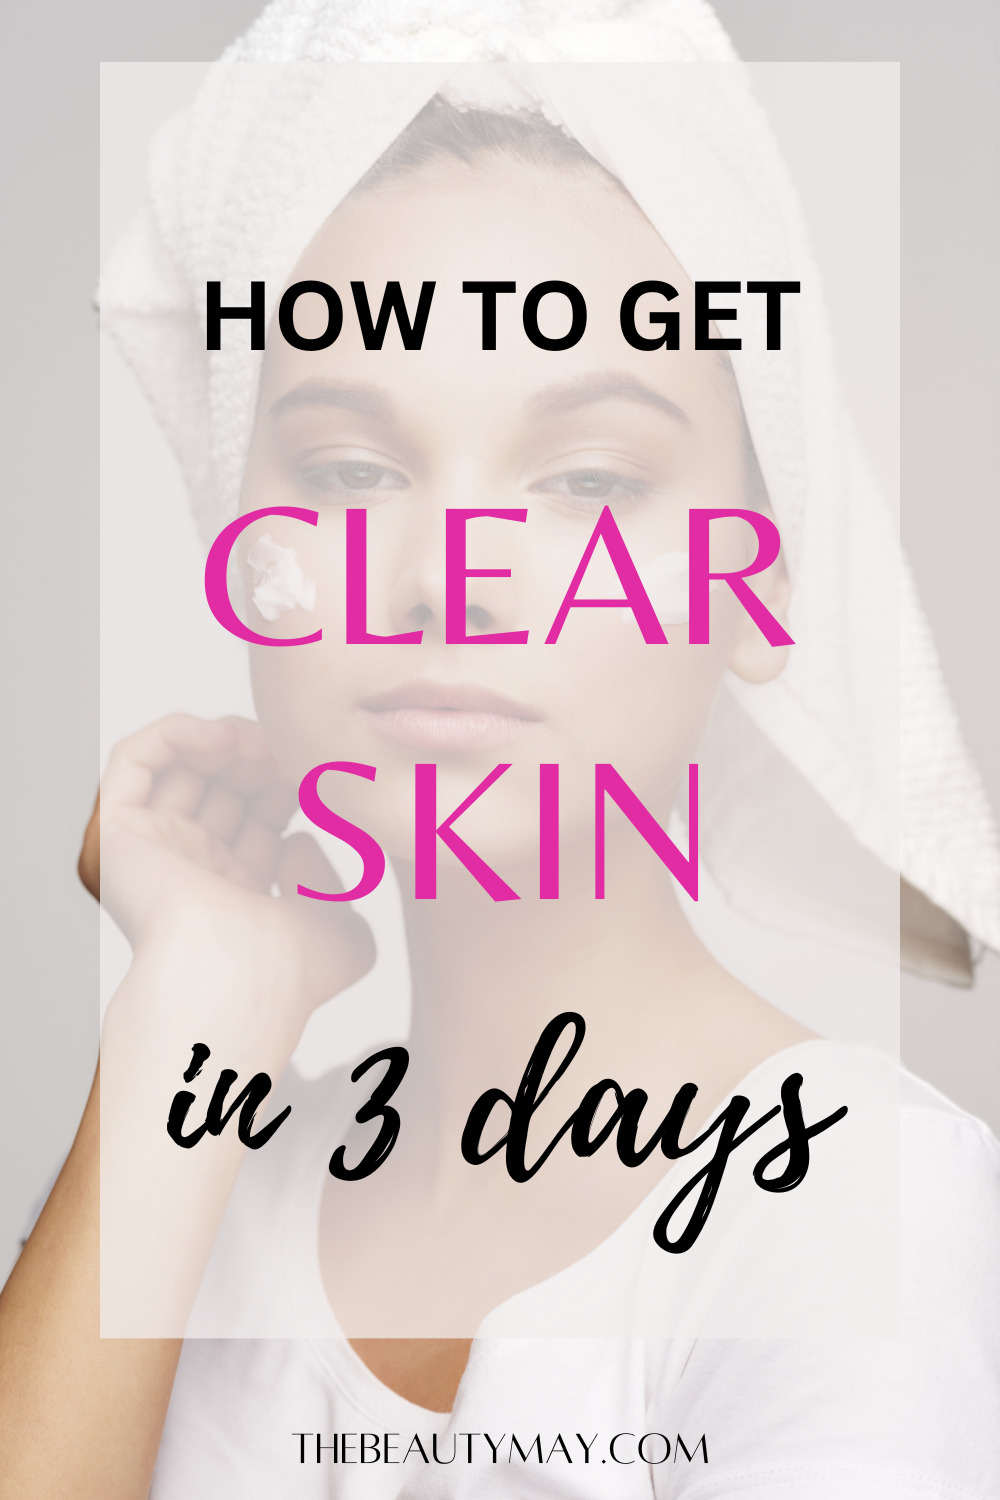 How to have clear skin in 2 days